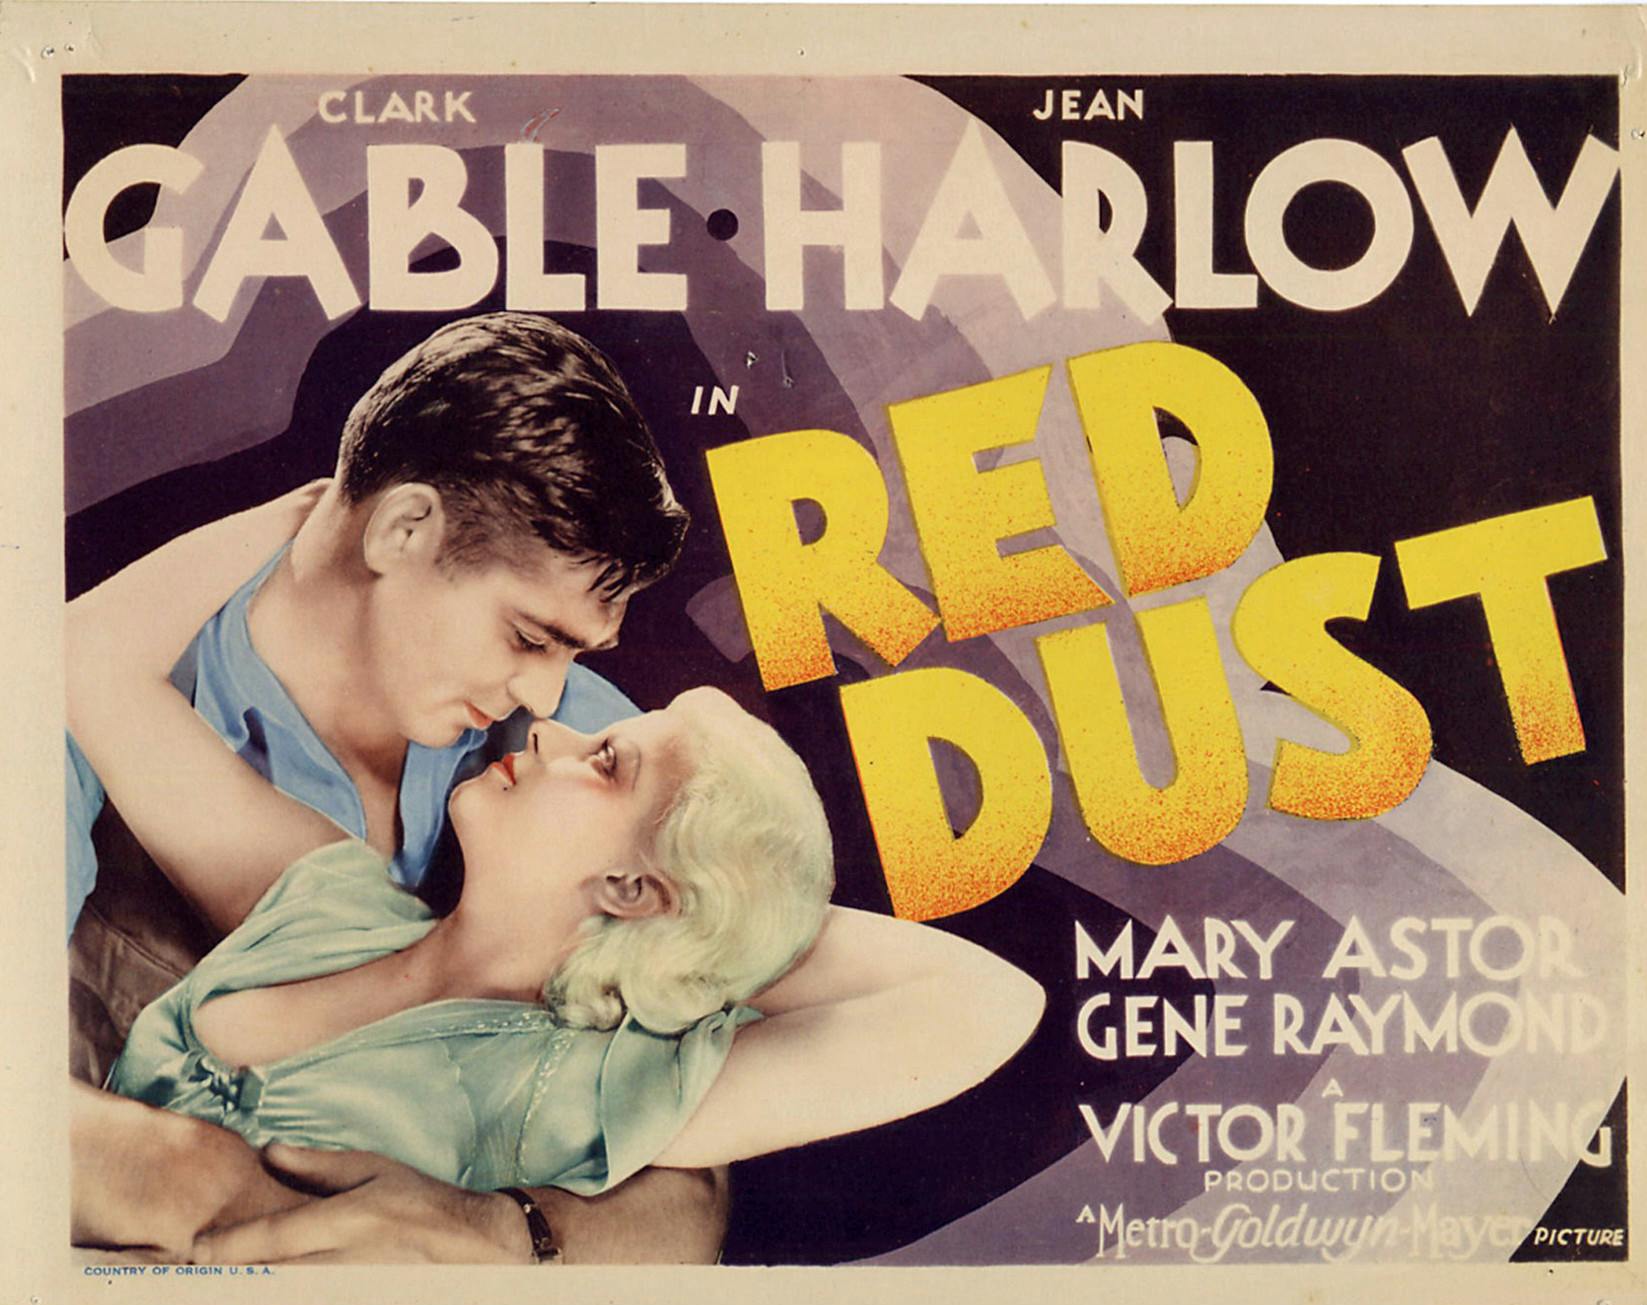 poster for the movie red dust starring clark gable